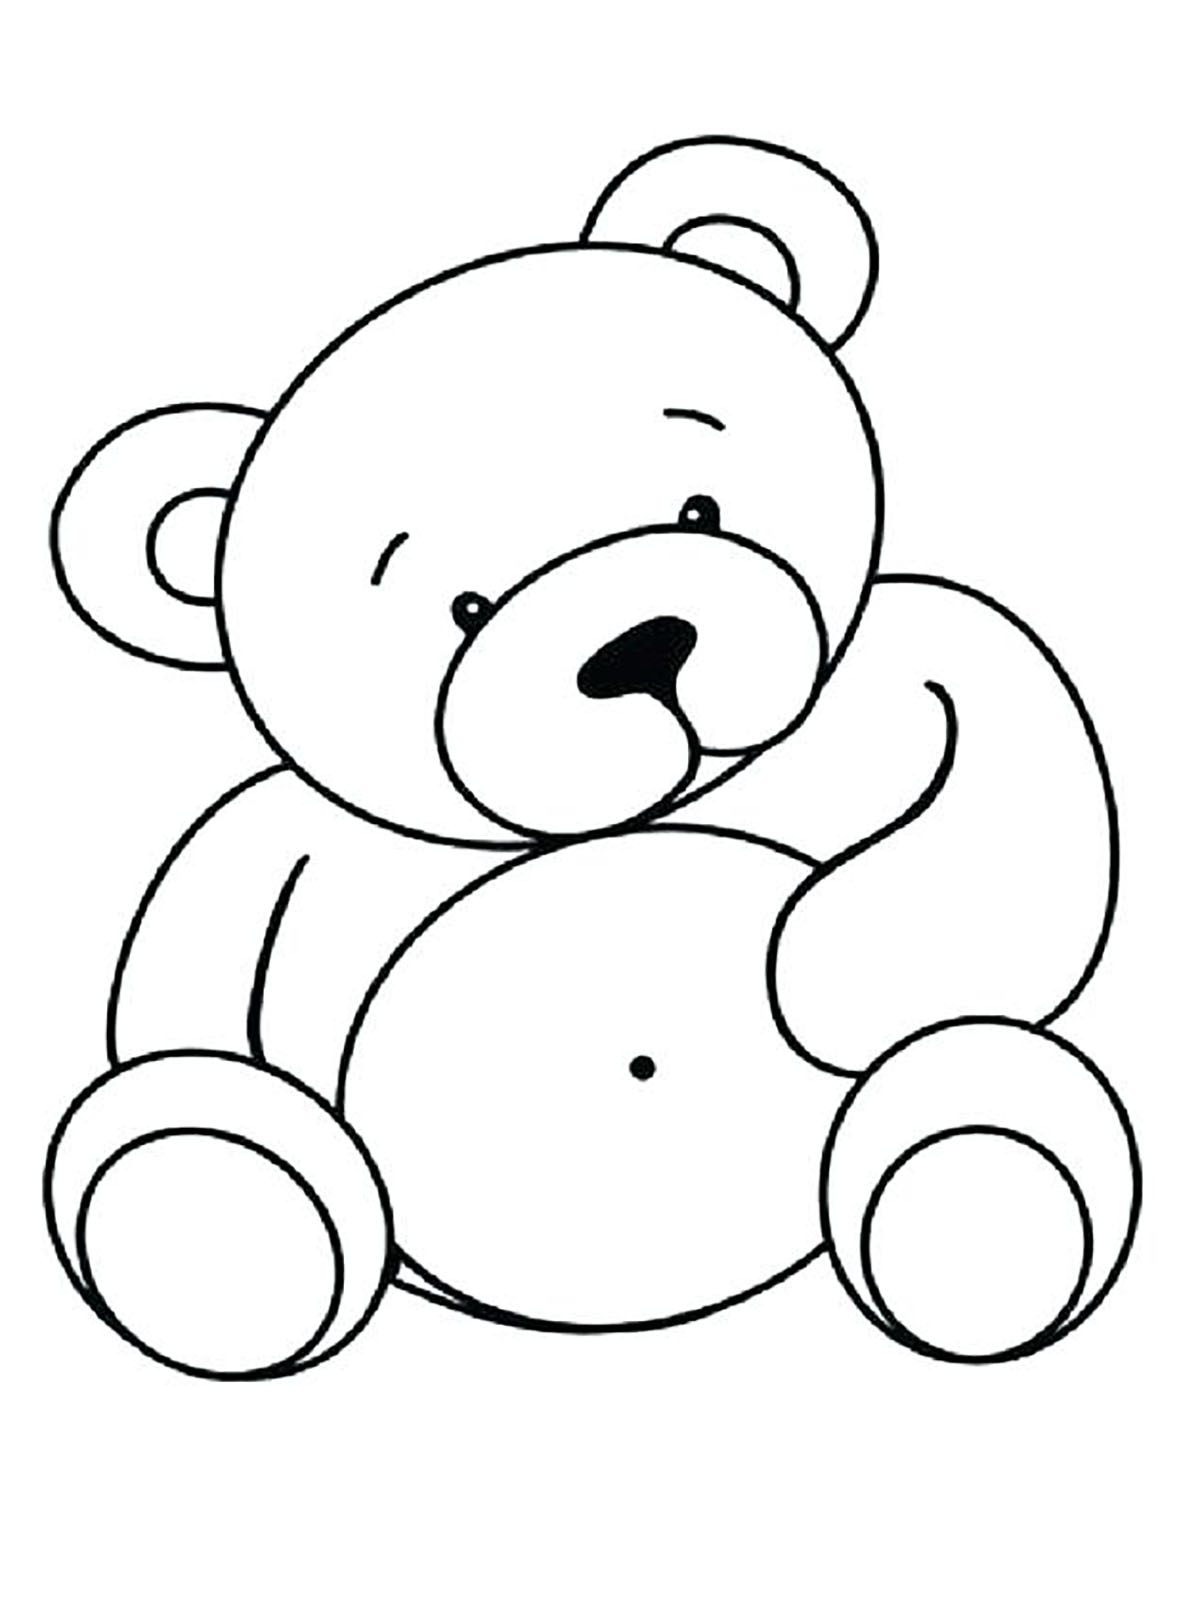 https://www.justcolor.net/kids/wp-content/uploads/sites/12/nggallery/bears/coloring-pages-for-children-bears-46105.jpg